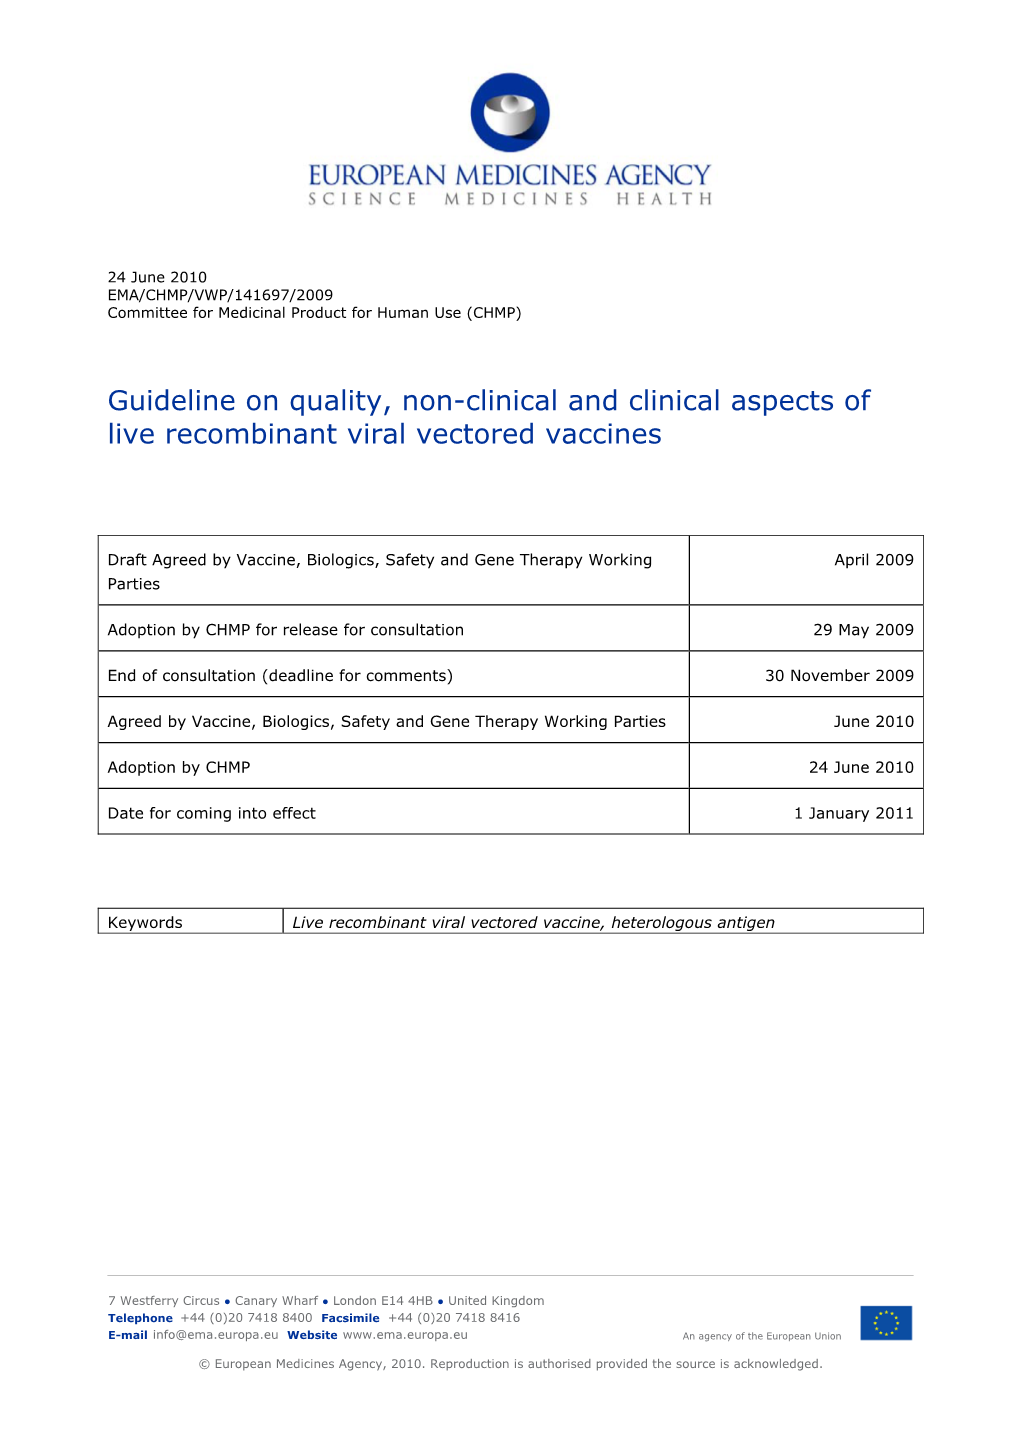 Guideline on Quality, Non-Clinical and Clinical Aspects of Live Recombinant Viral Vectored Vaccines